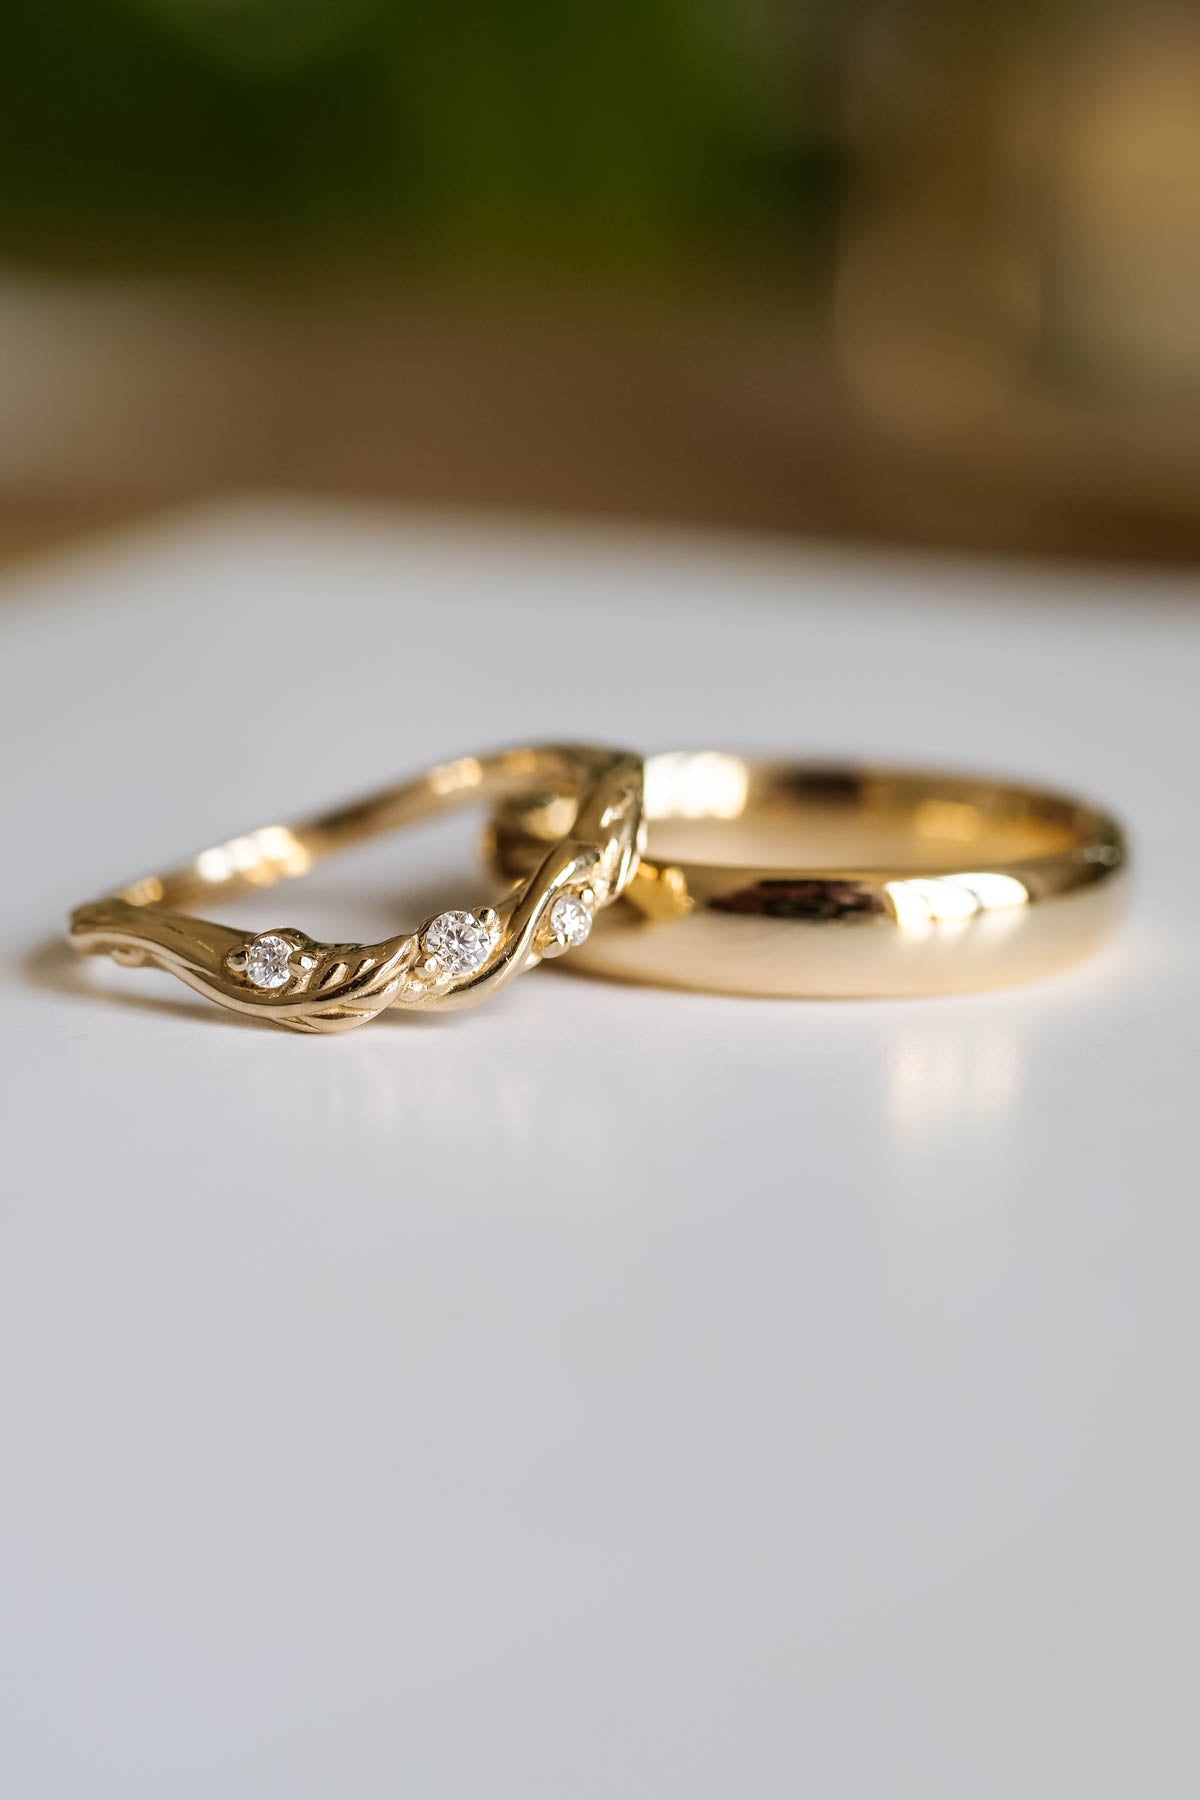 Unique Wedding Ring Sets, Couples Rings